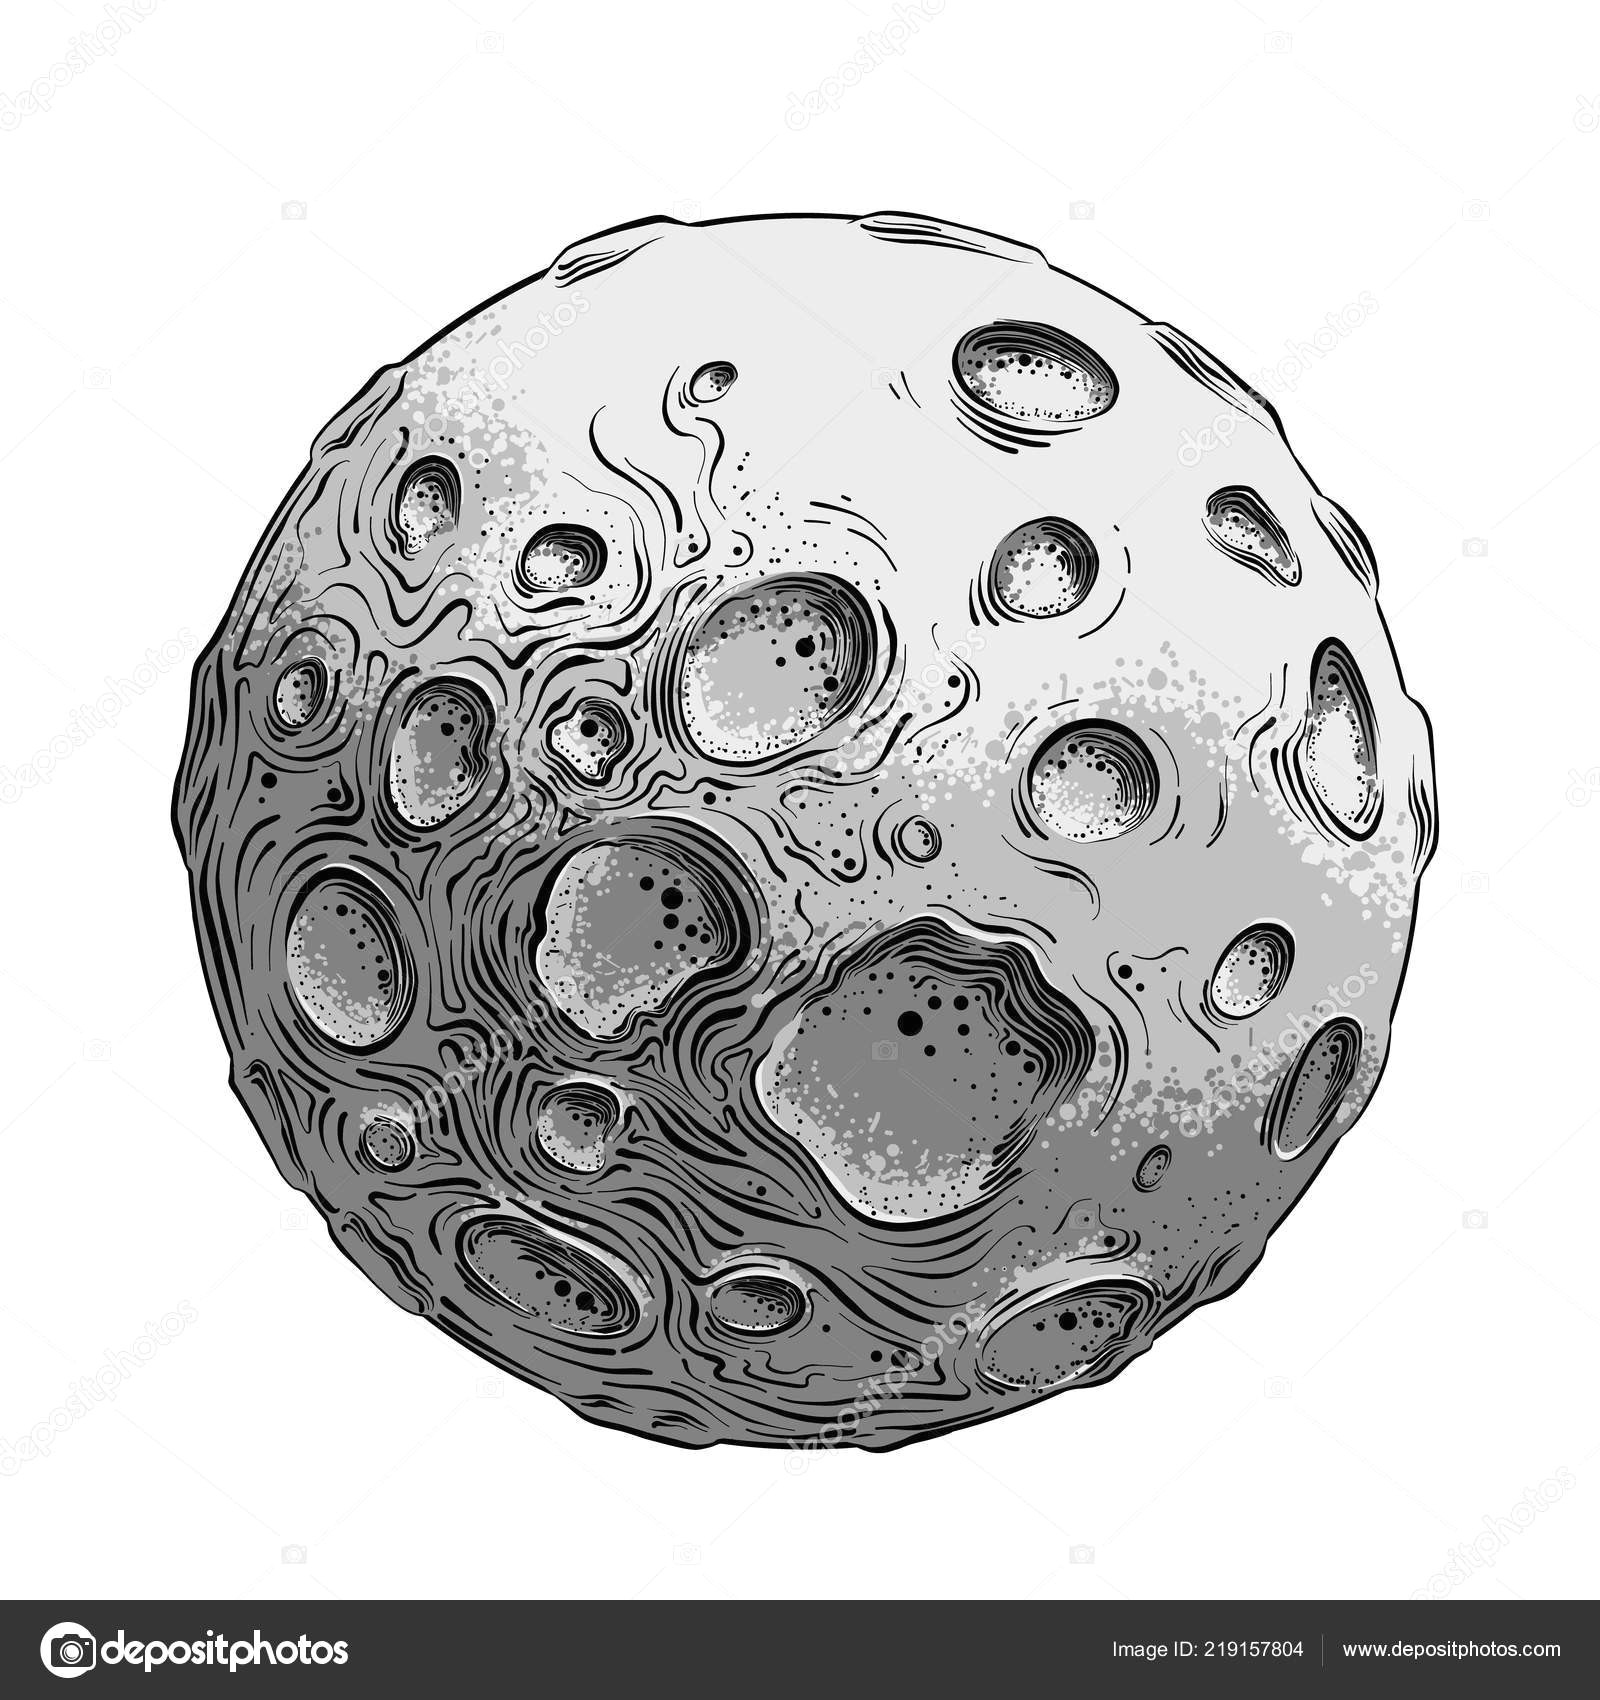 Drawing Of A Dog Black and White Hand Drawn Sketch Of Moon Planet In Black and White Color isolated